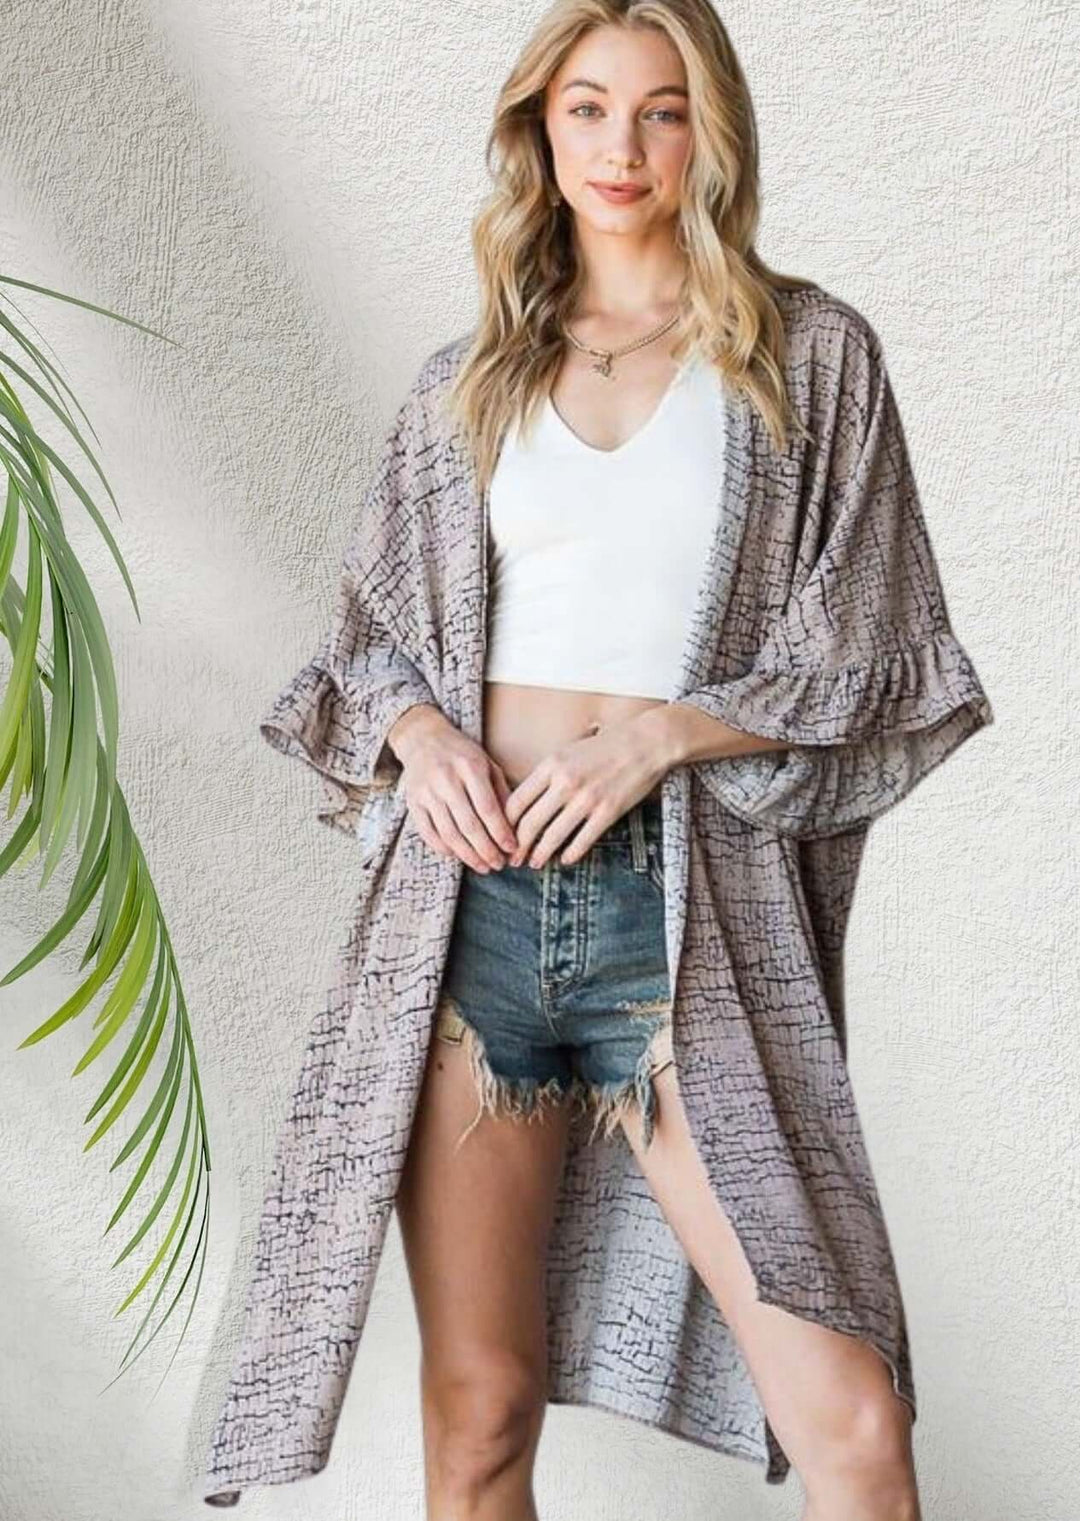 Made in USA Women's Taupe & Navy Versatile Kimono Cardigan with Ruffled Sleeves and Optional Tie Front | Classy Cozy Cool Women's Made in America Boutique